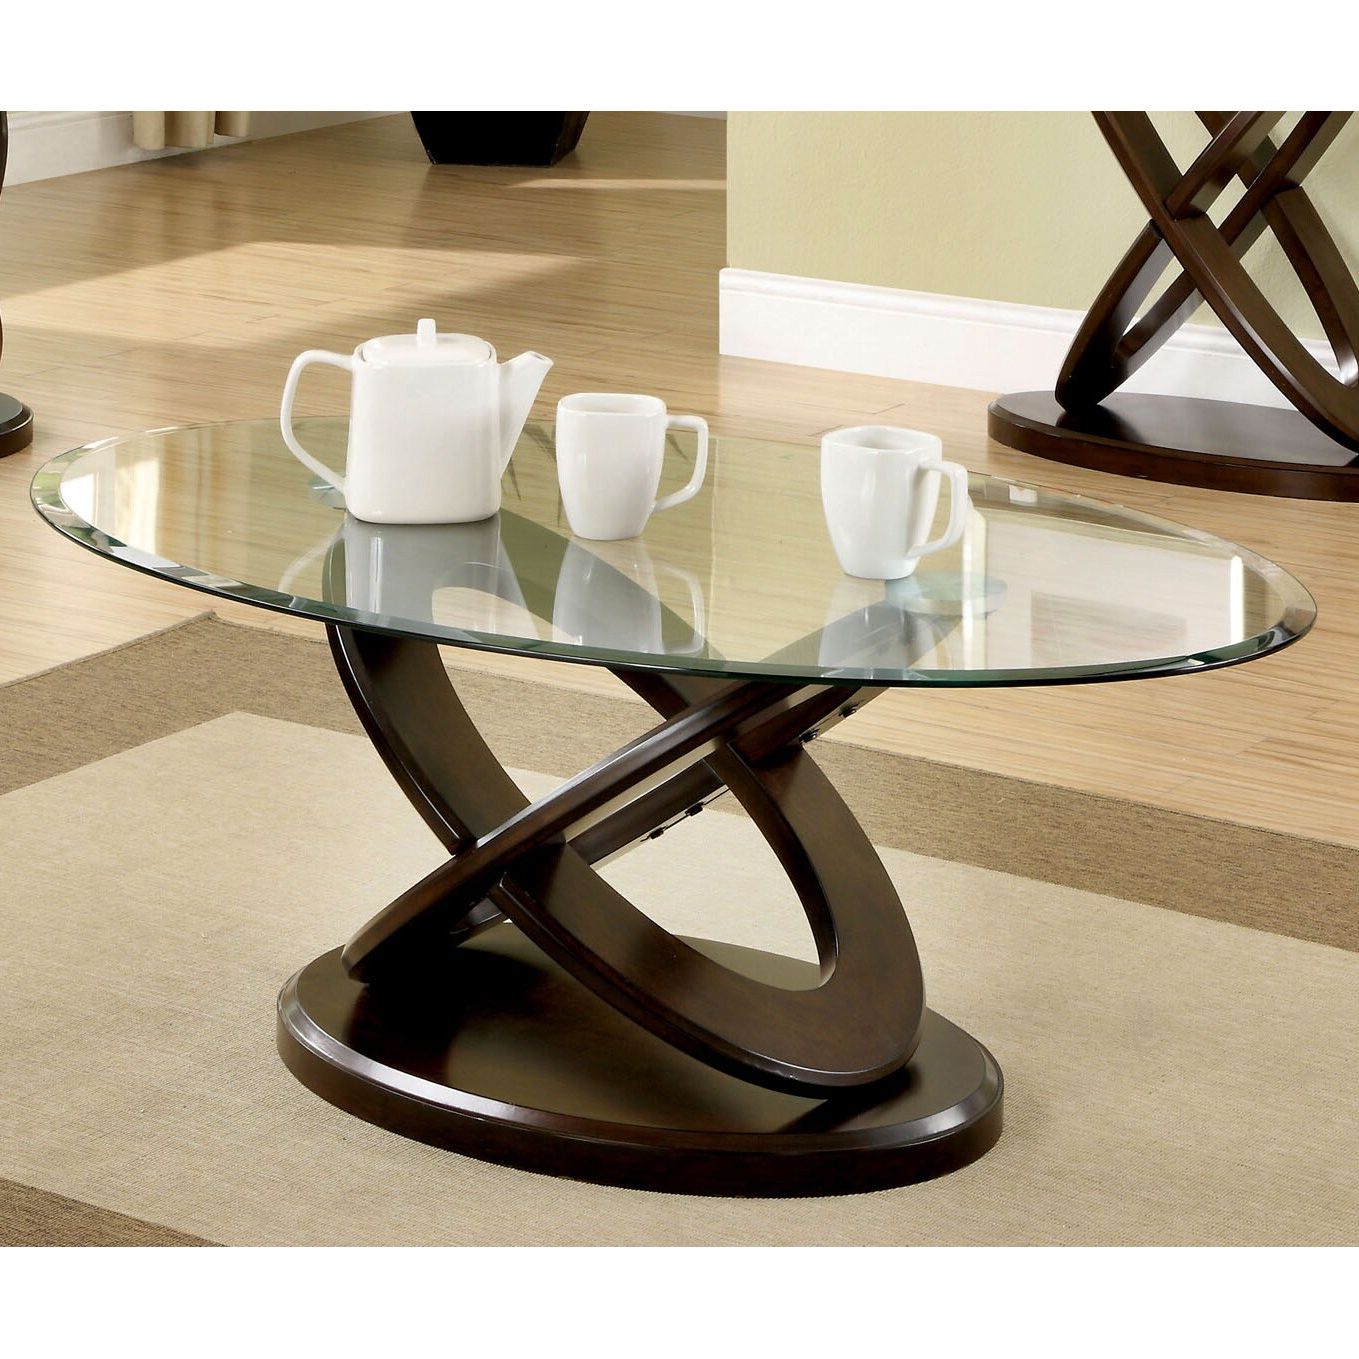 Furniture Of America Evalline Oval Glass Top Coffee Table With Trendy Espresso Wood And Glass Top Coffee Tables (Gallery 20 of 20)